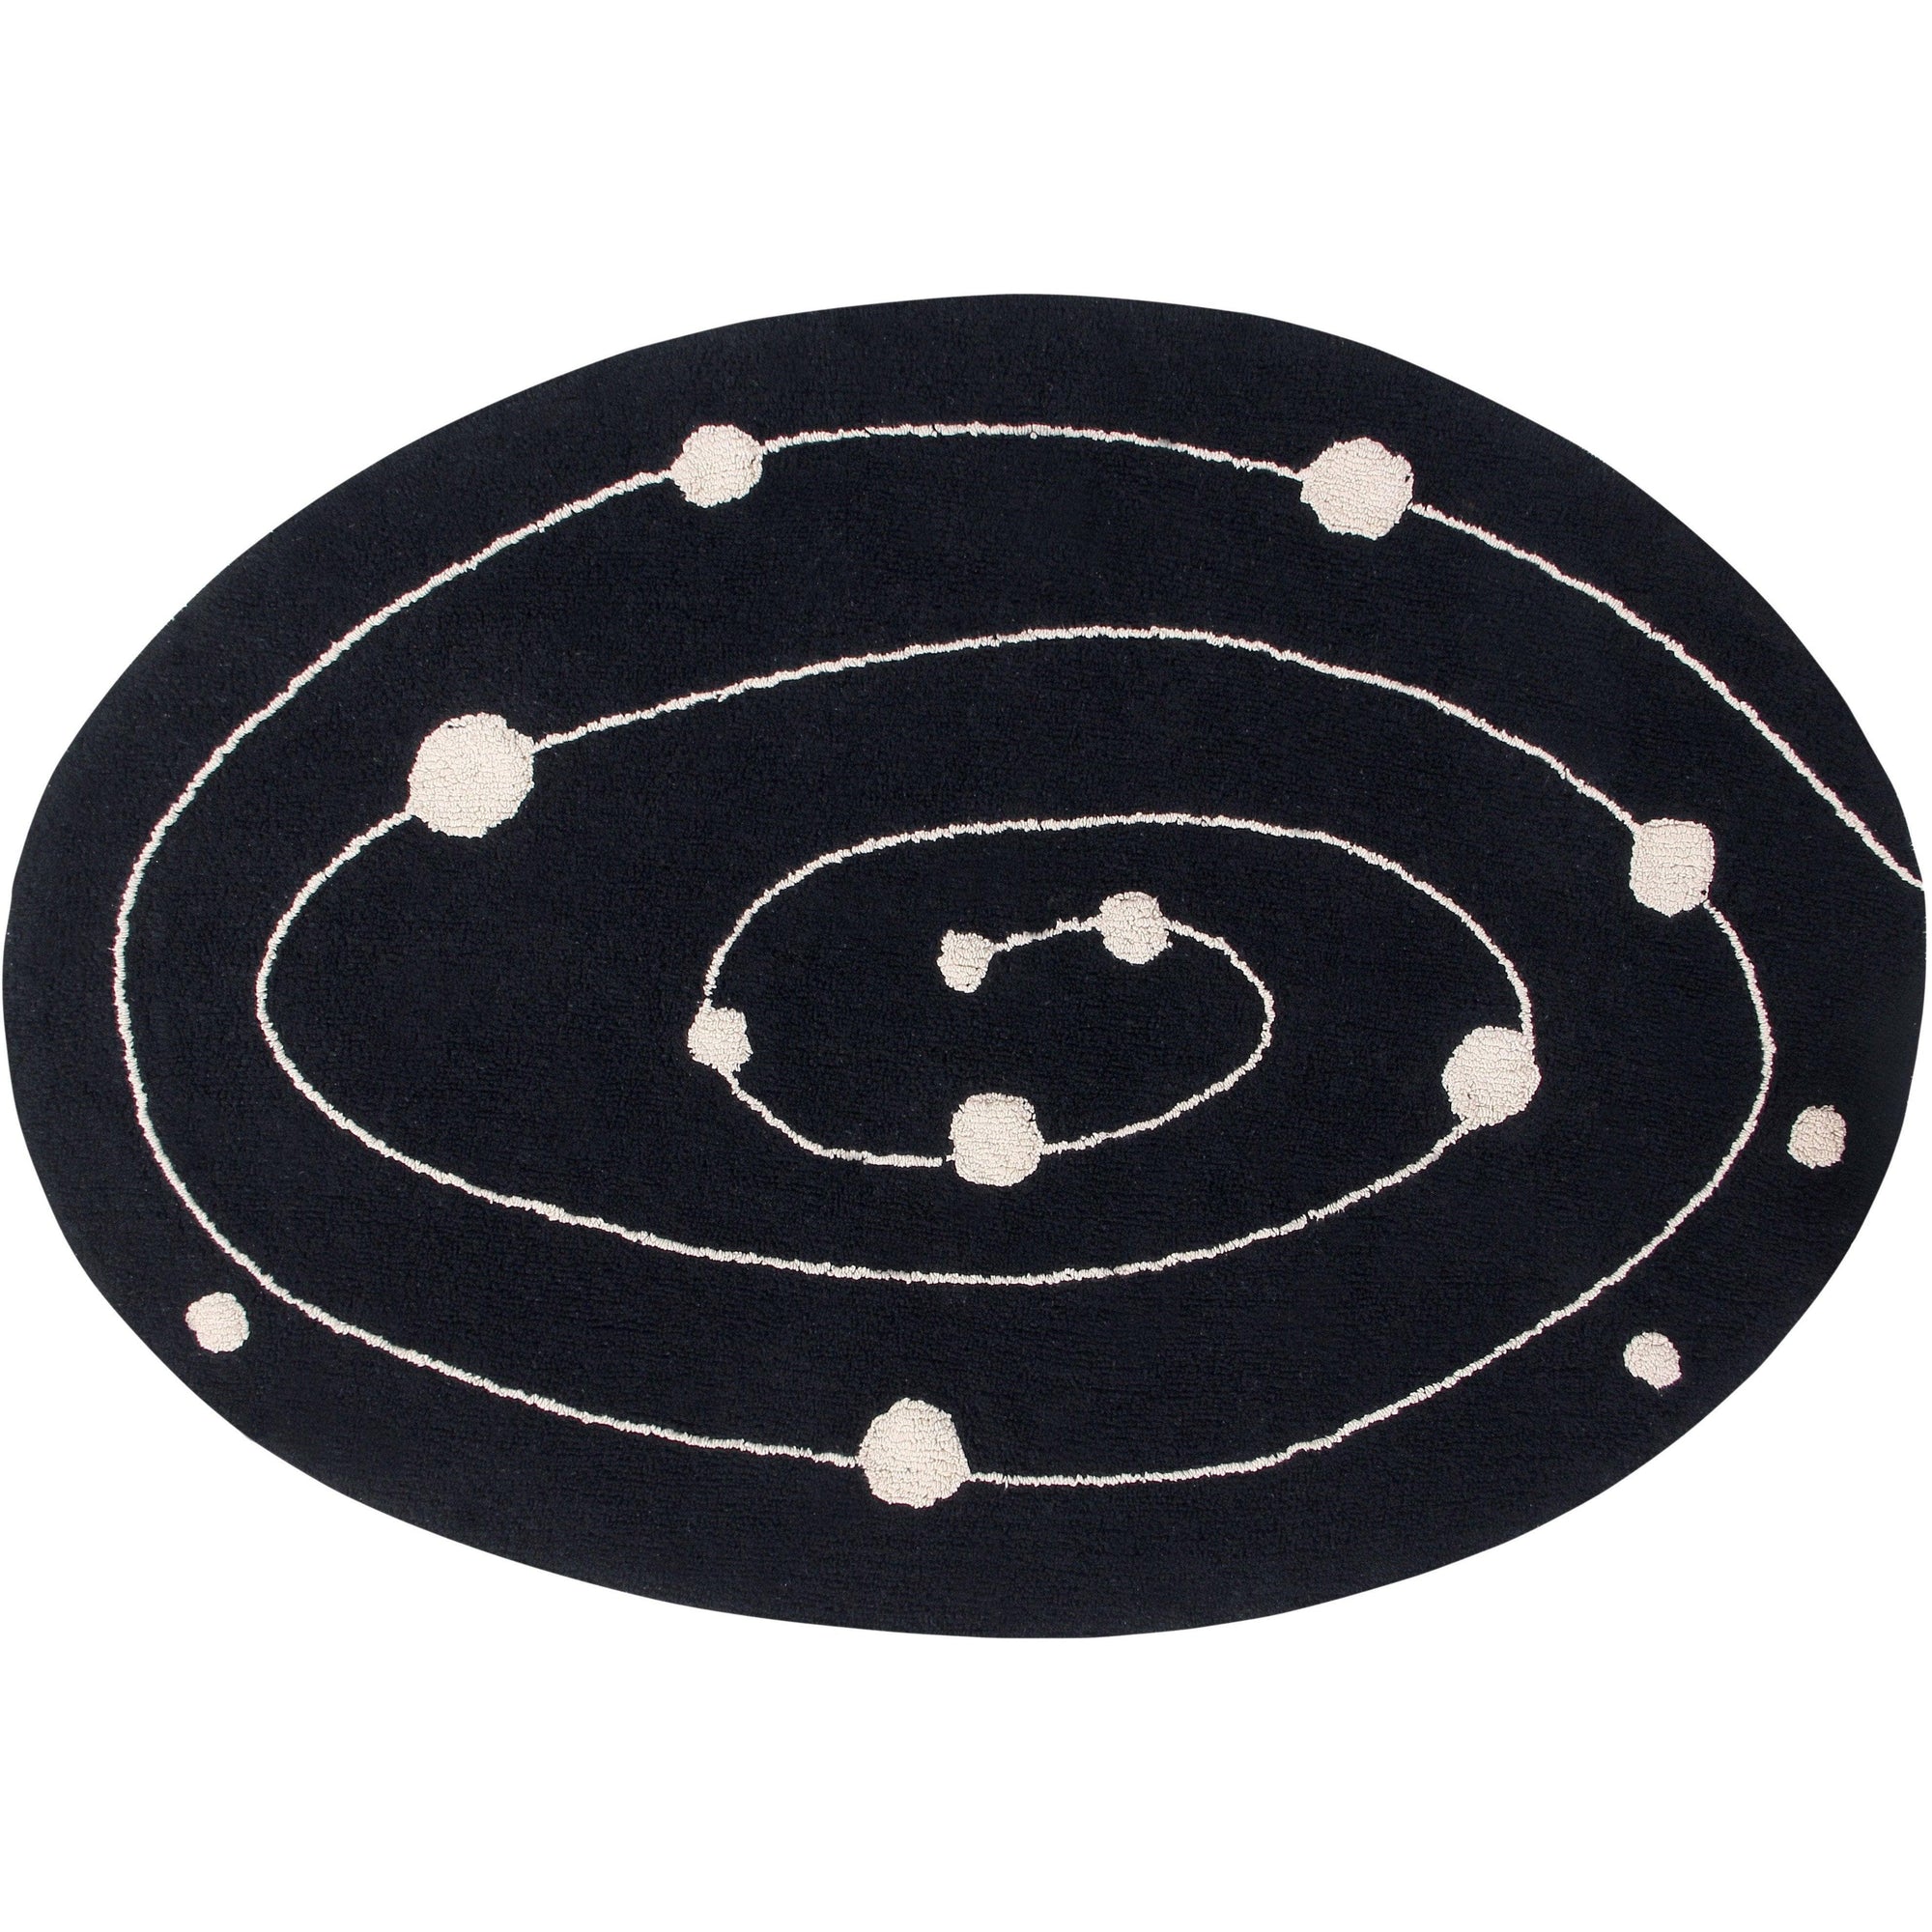 Rugs by Roo | Lorena Canals Milky Way Machine Washable Oval Area Rug-C-MILKYWAY